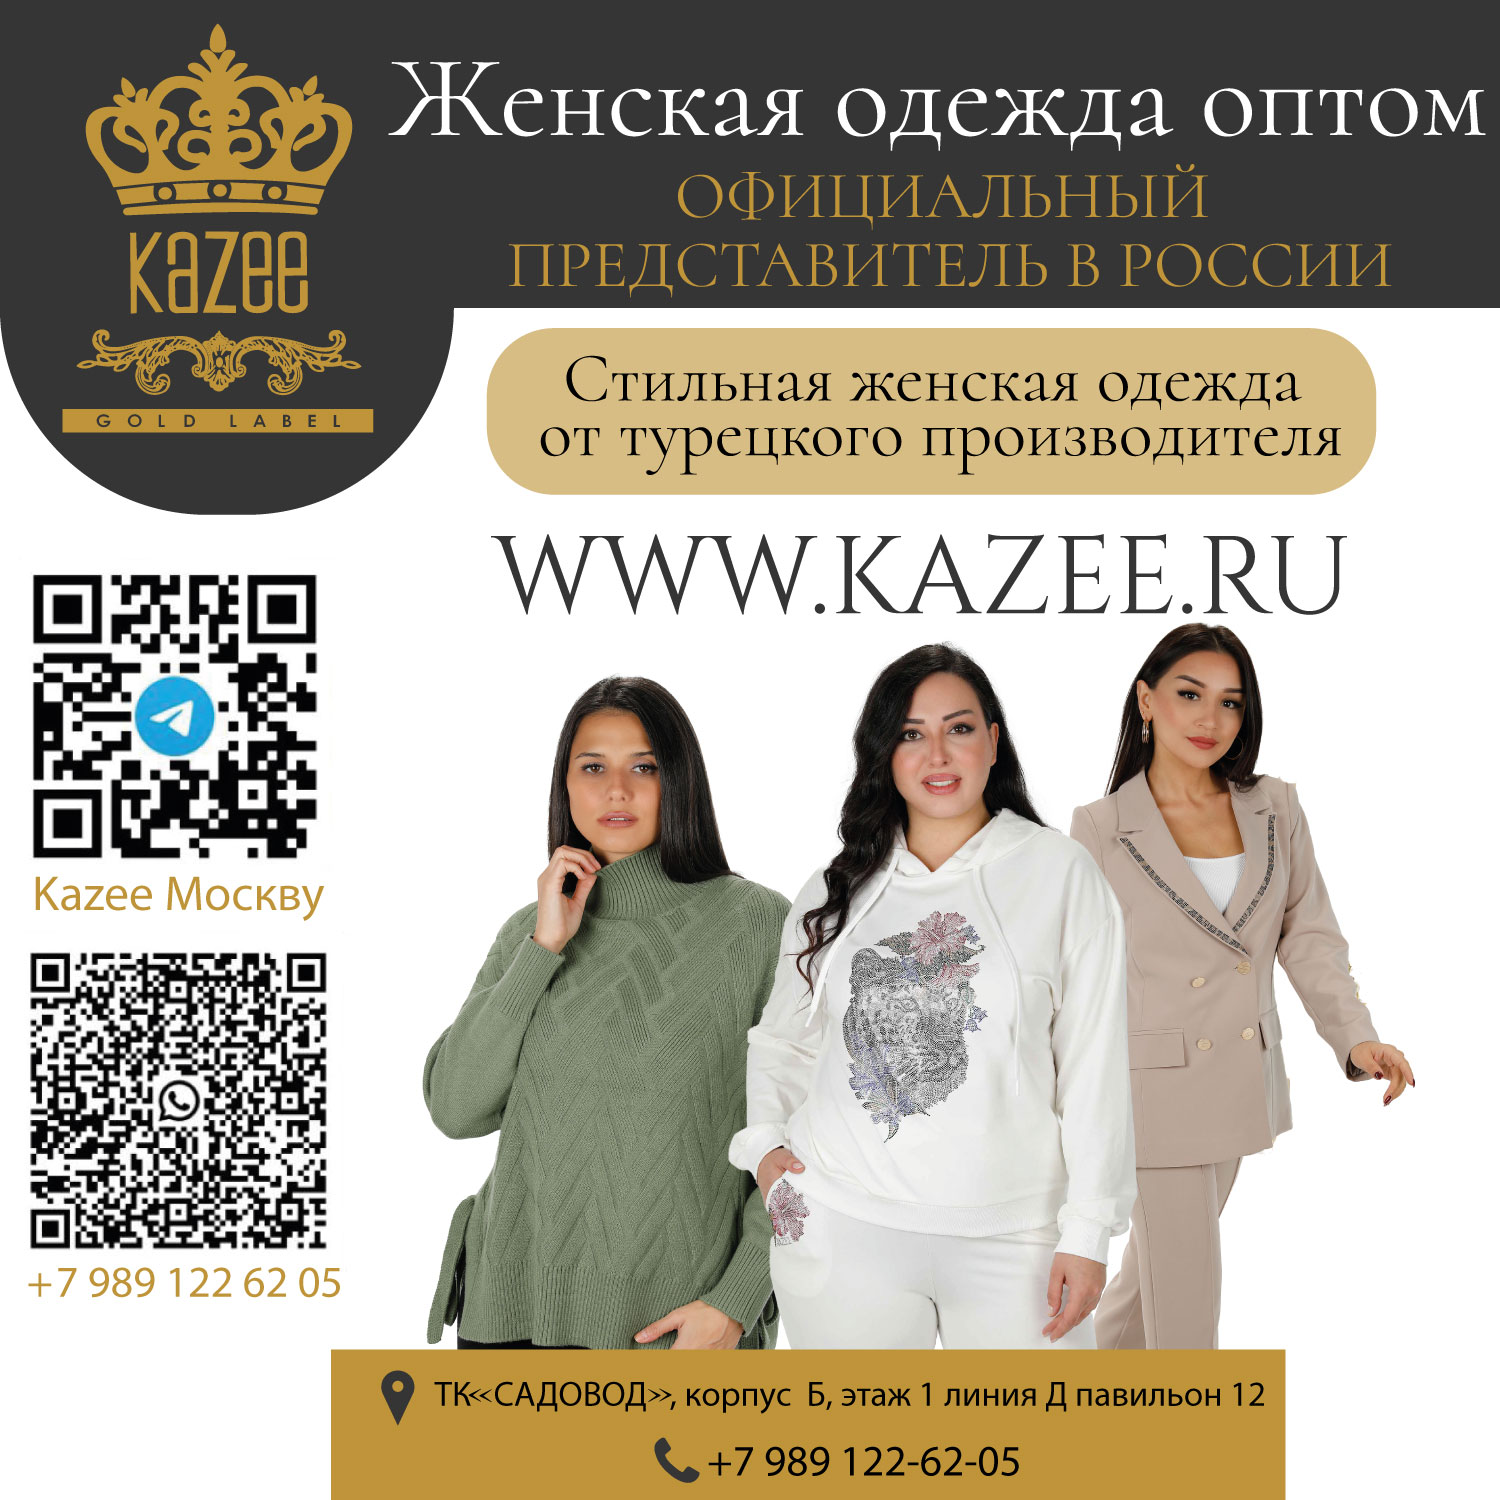 Official Representative of KAZEE Store in Russia